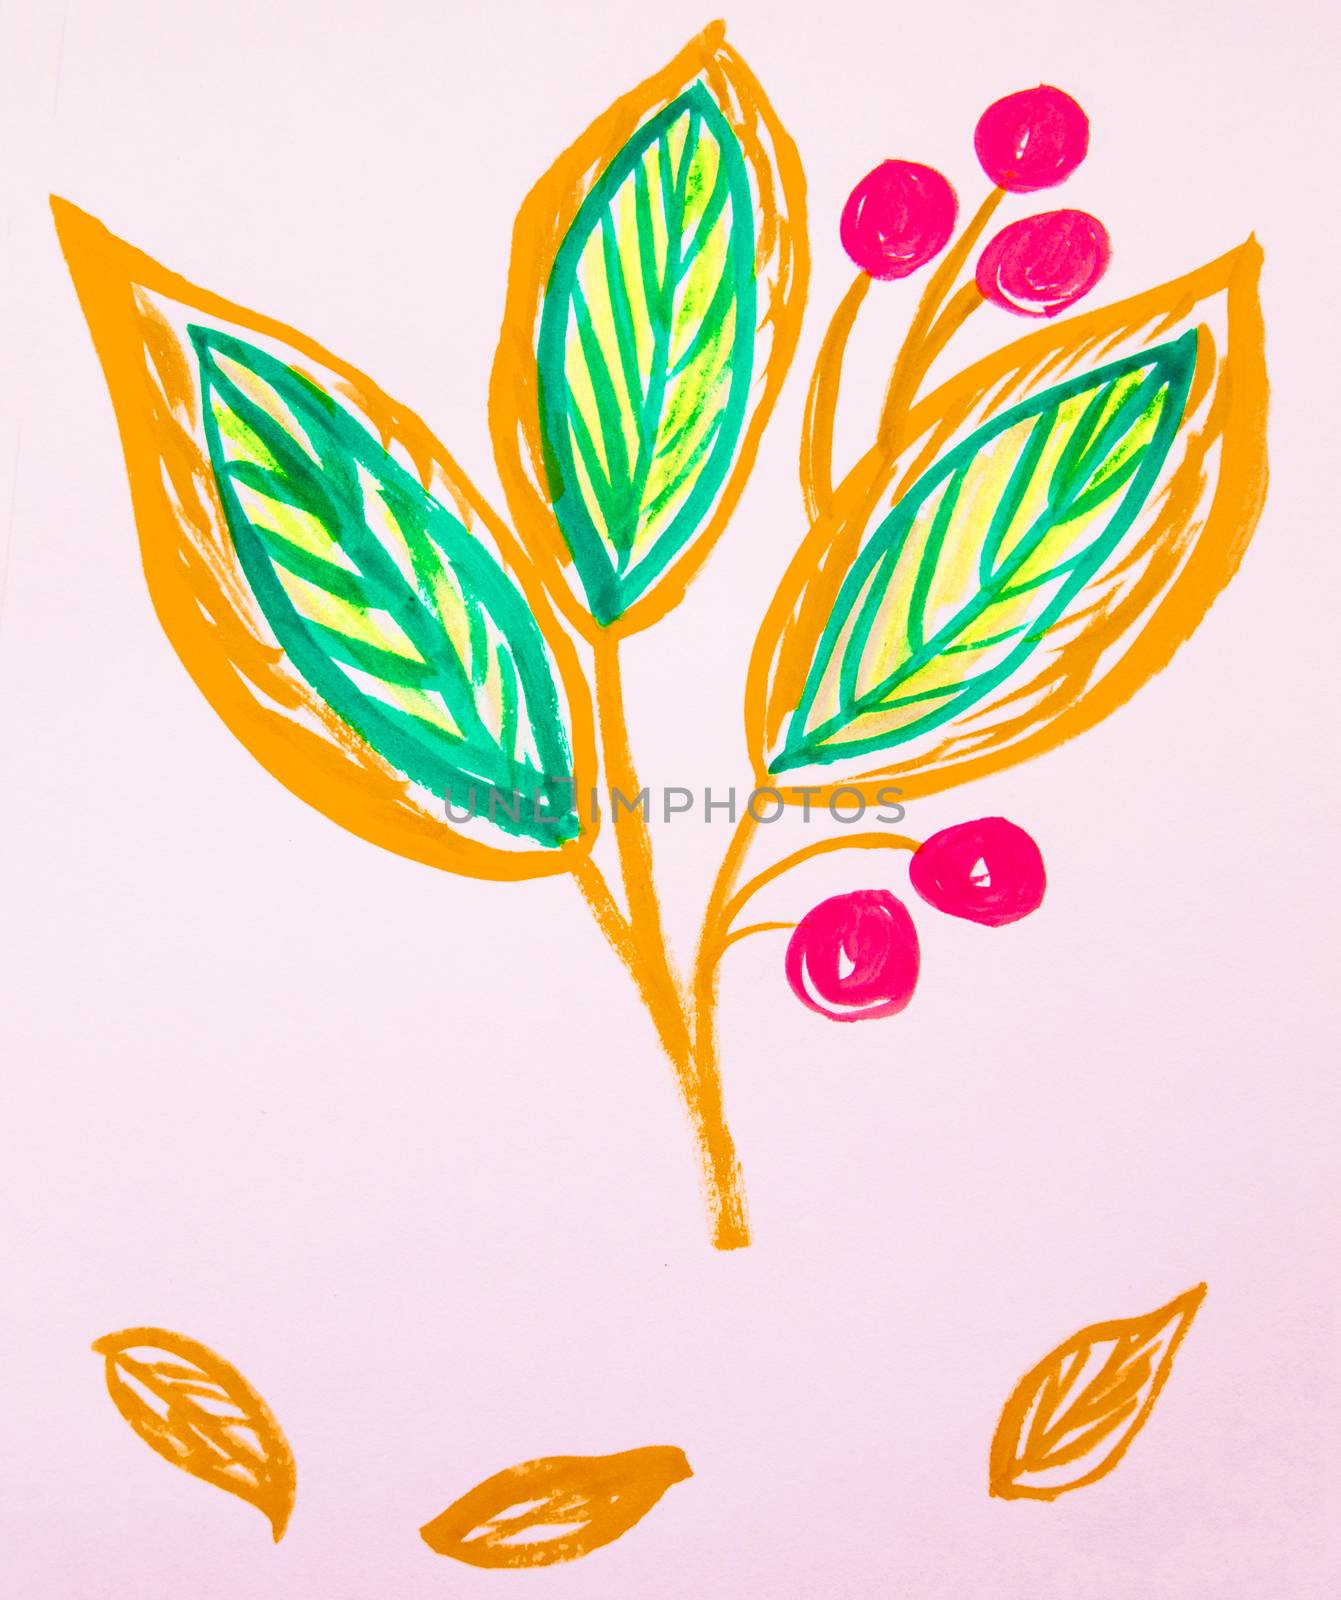 Cute hand-Drawn watercolor flower stem with leaves and berries. Orange and green, spring flowers, Botanical garden plants by claire_lucia